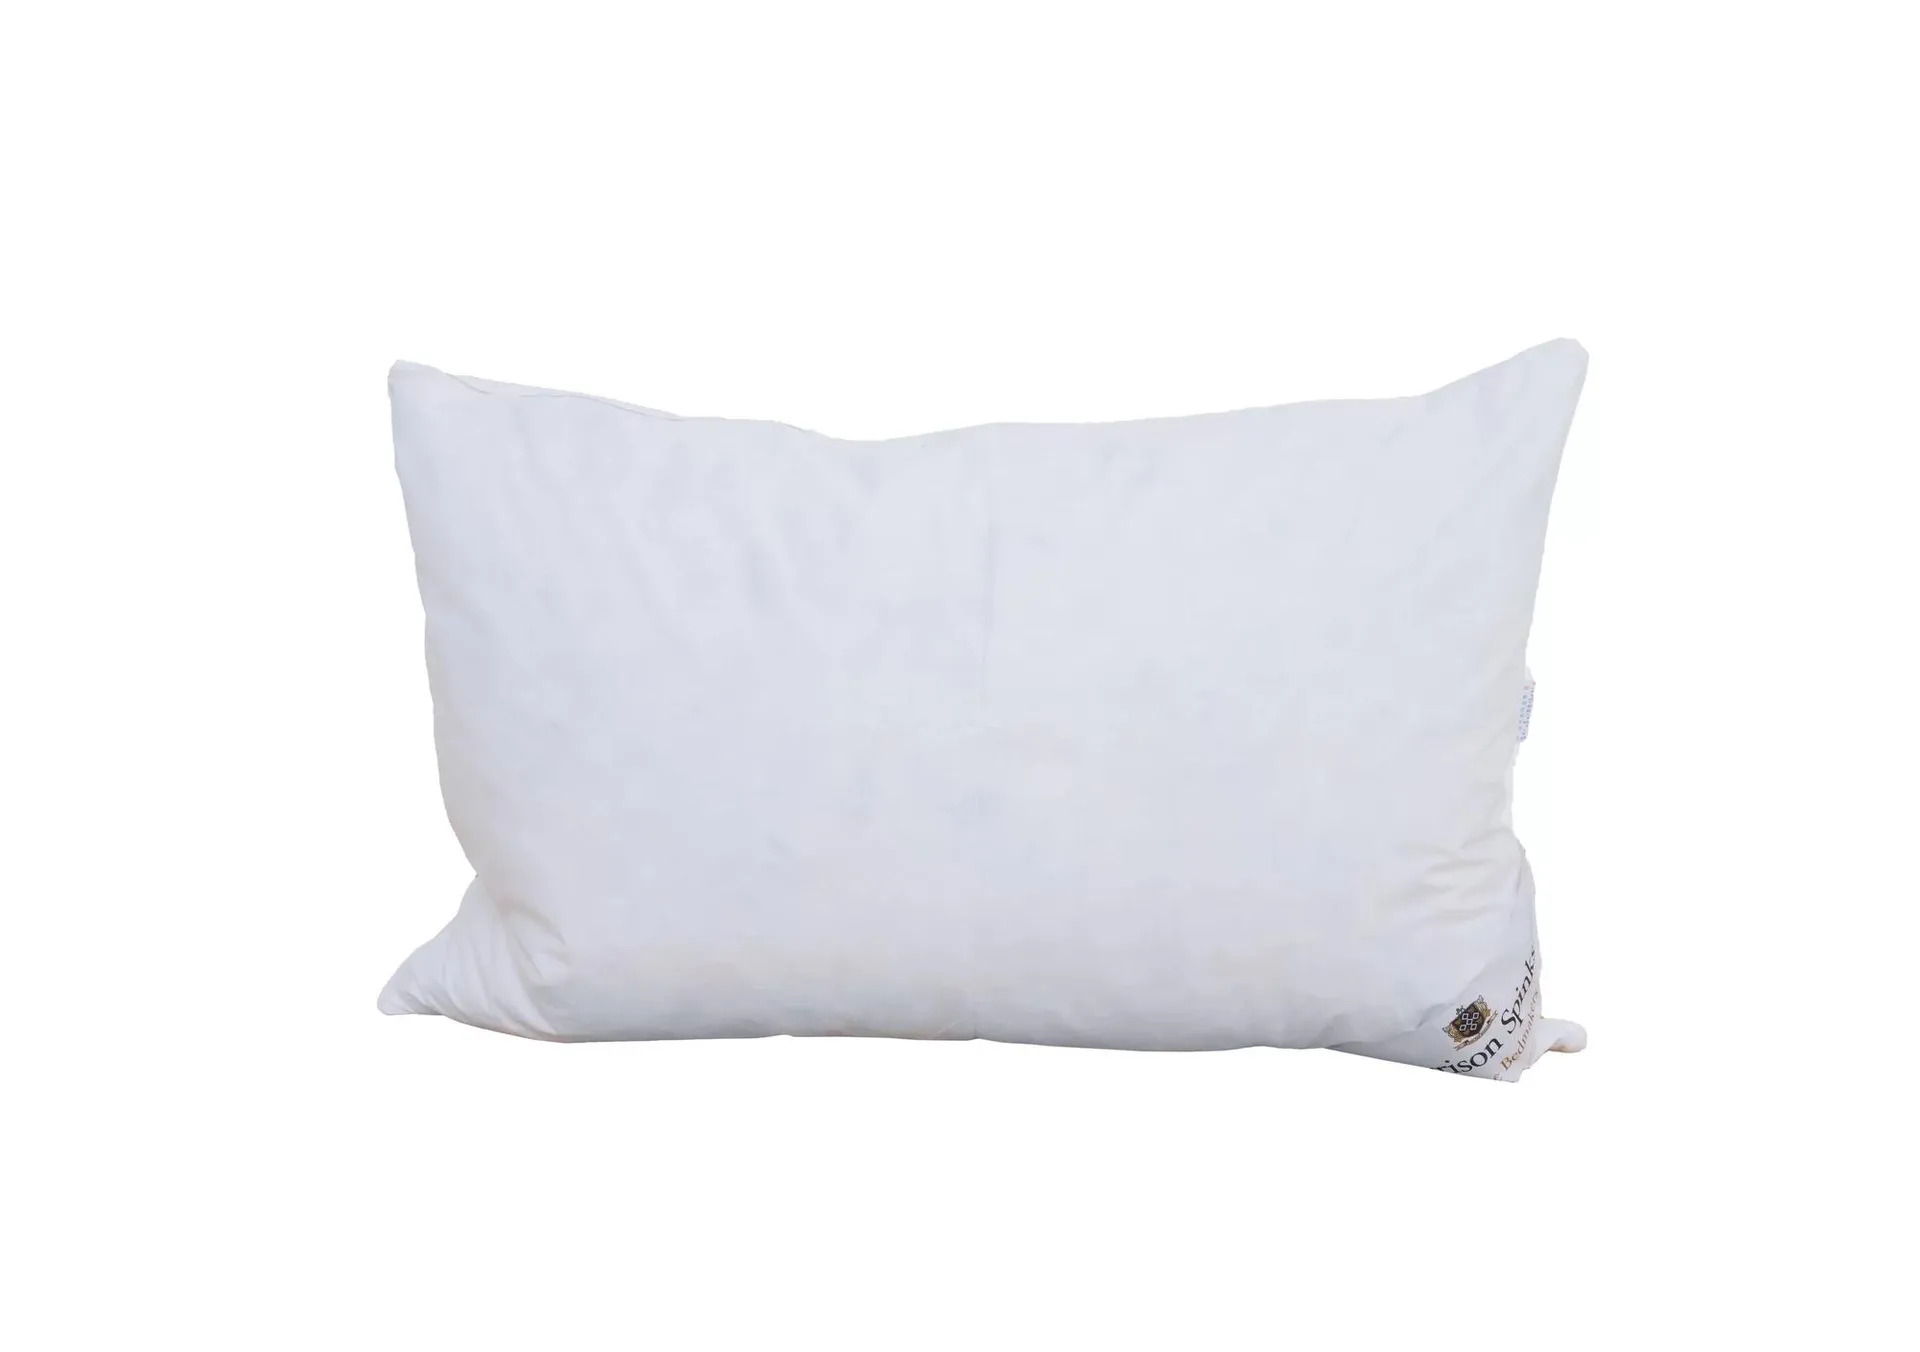 Yorkshire Luxury Goose Down Pillow